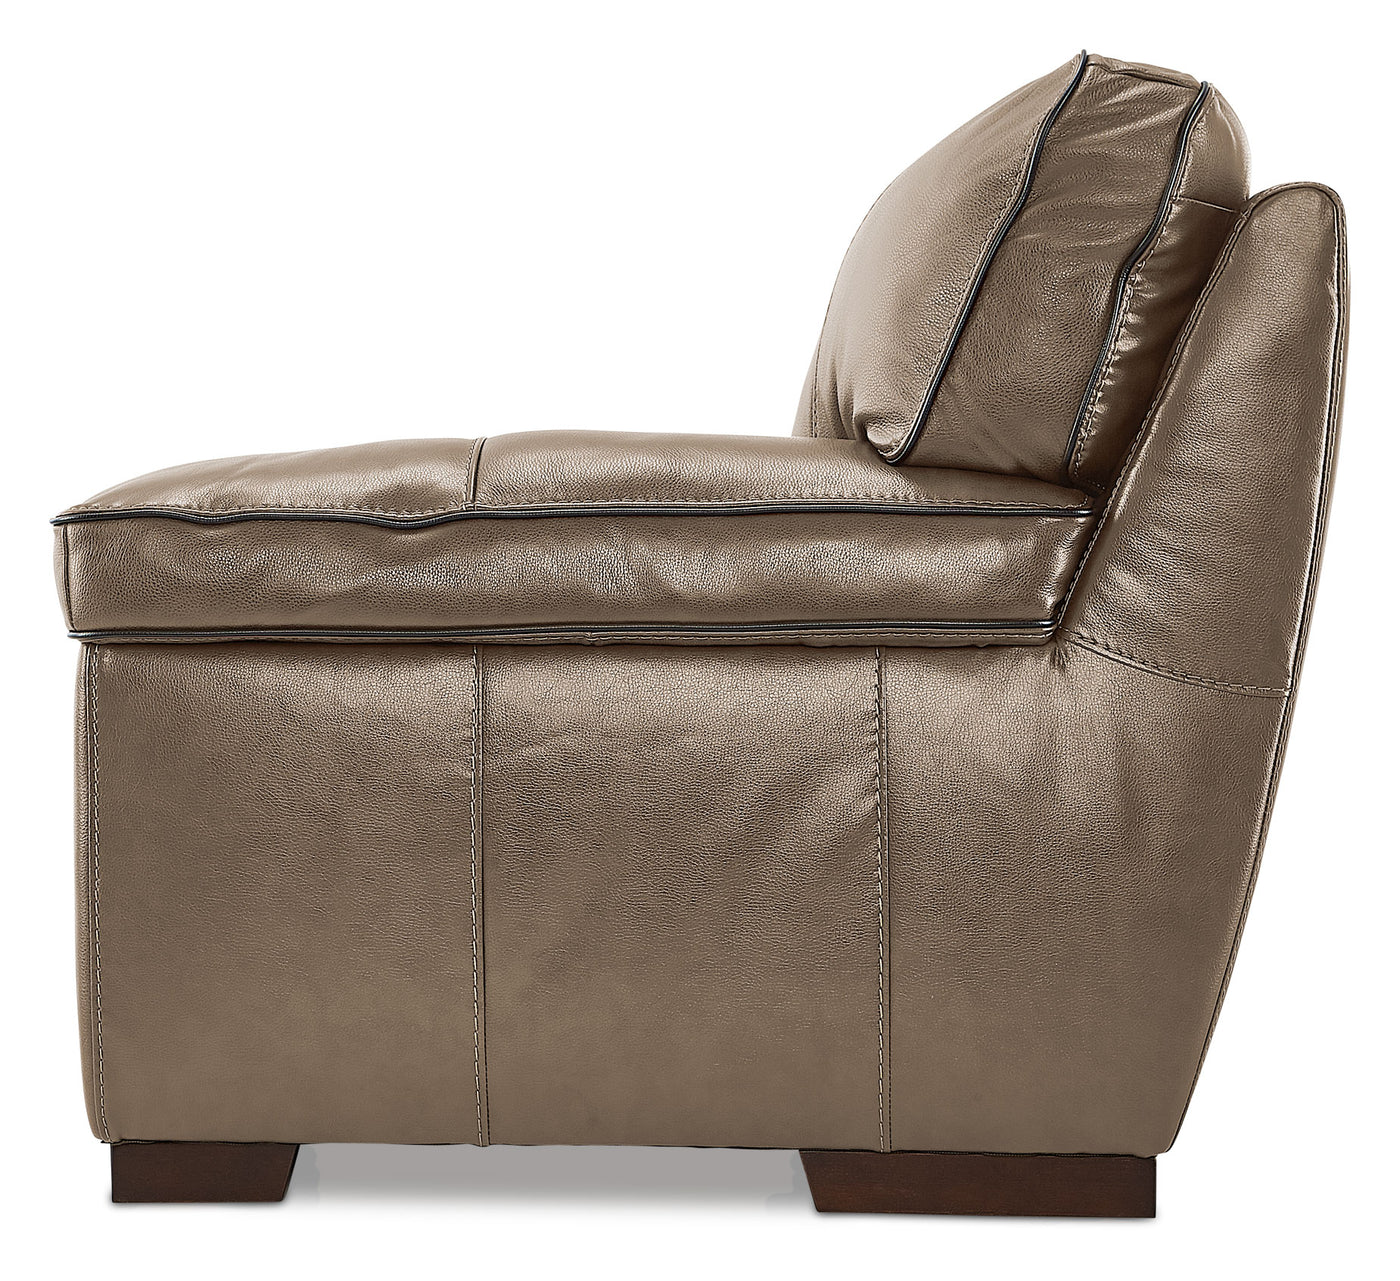 Stampede Leather Loveseat - Buff